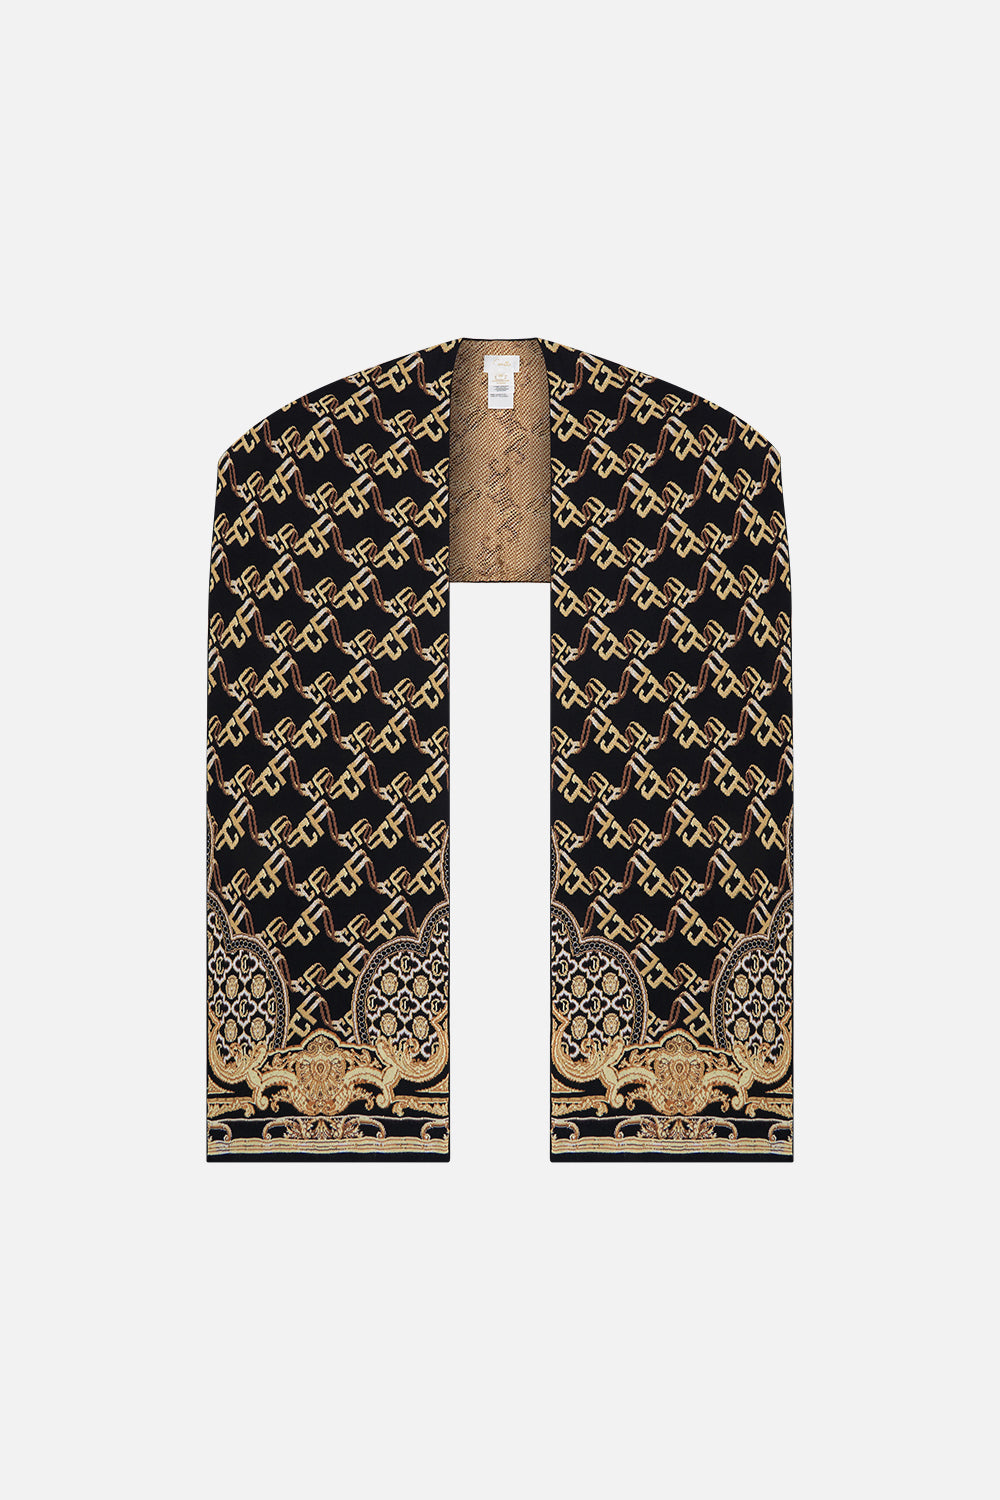 Product view of CAMILLA knit scarf in Tether Me Not jacquard pattern